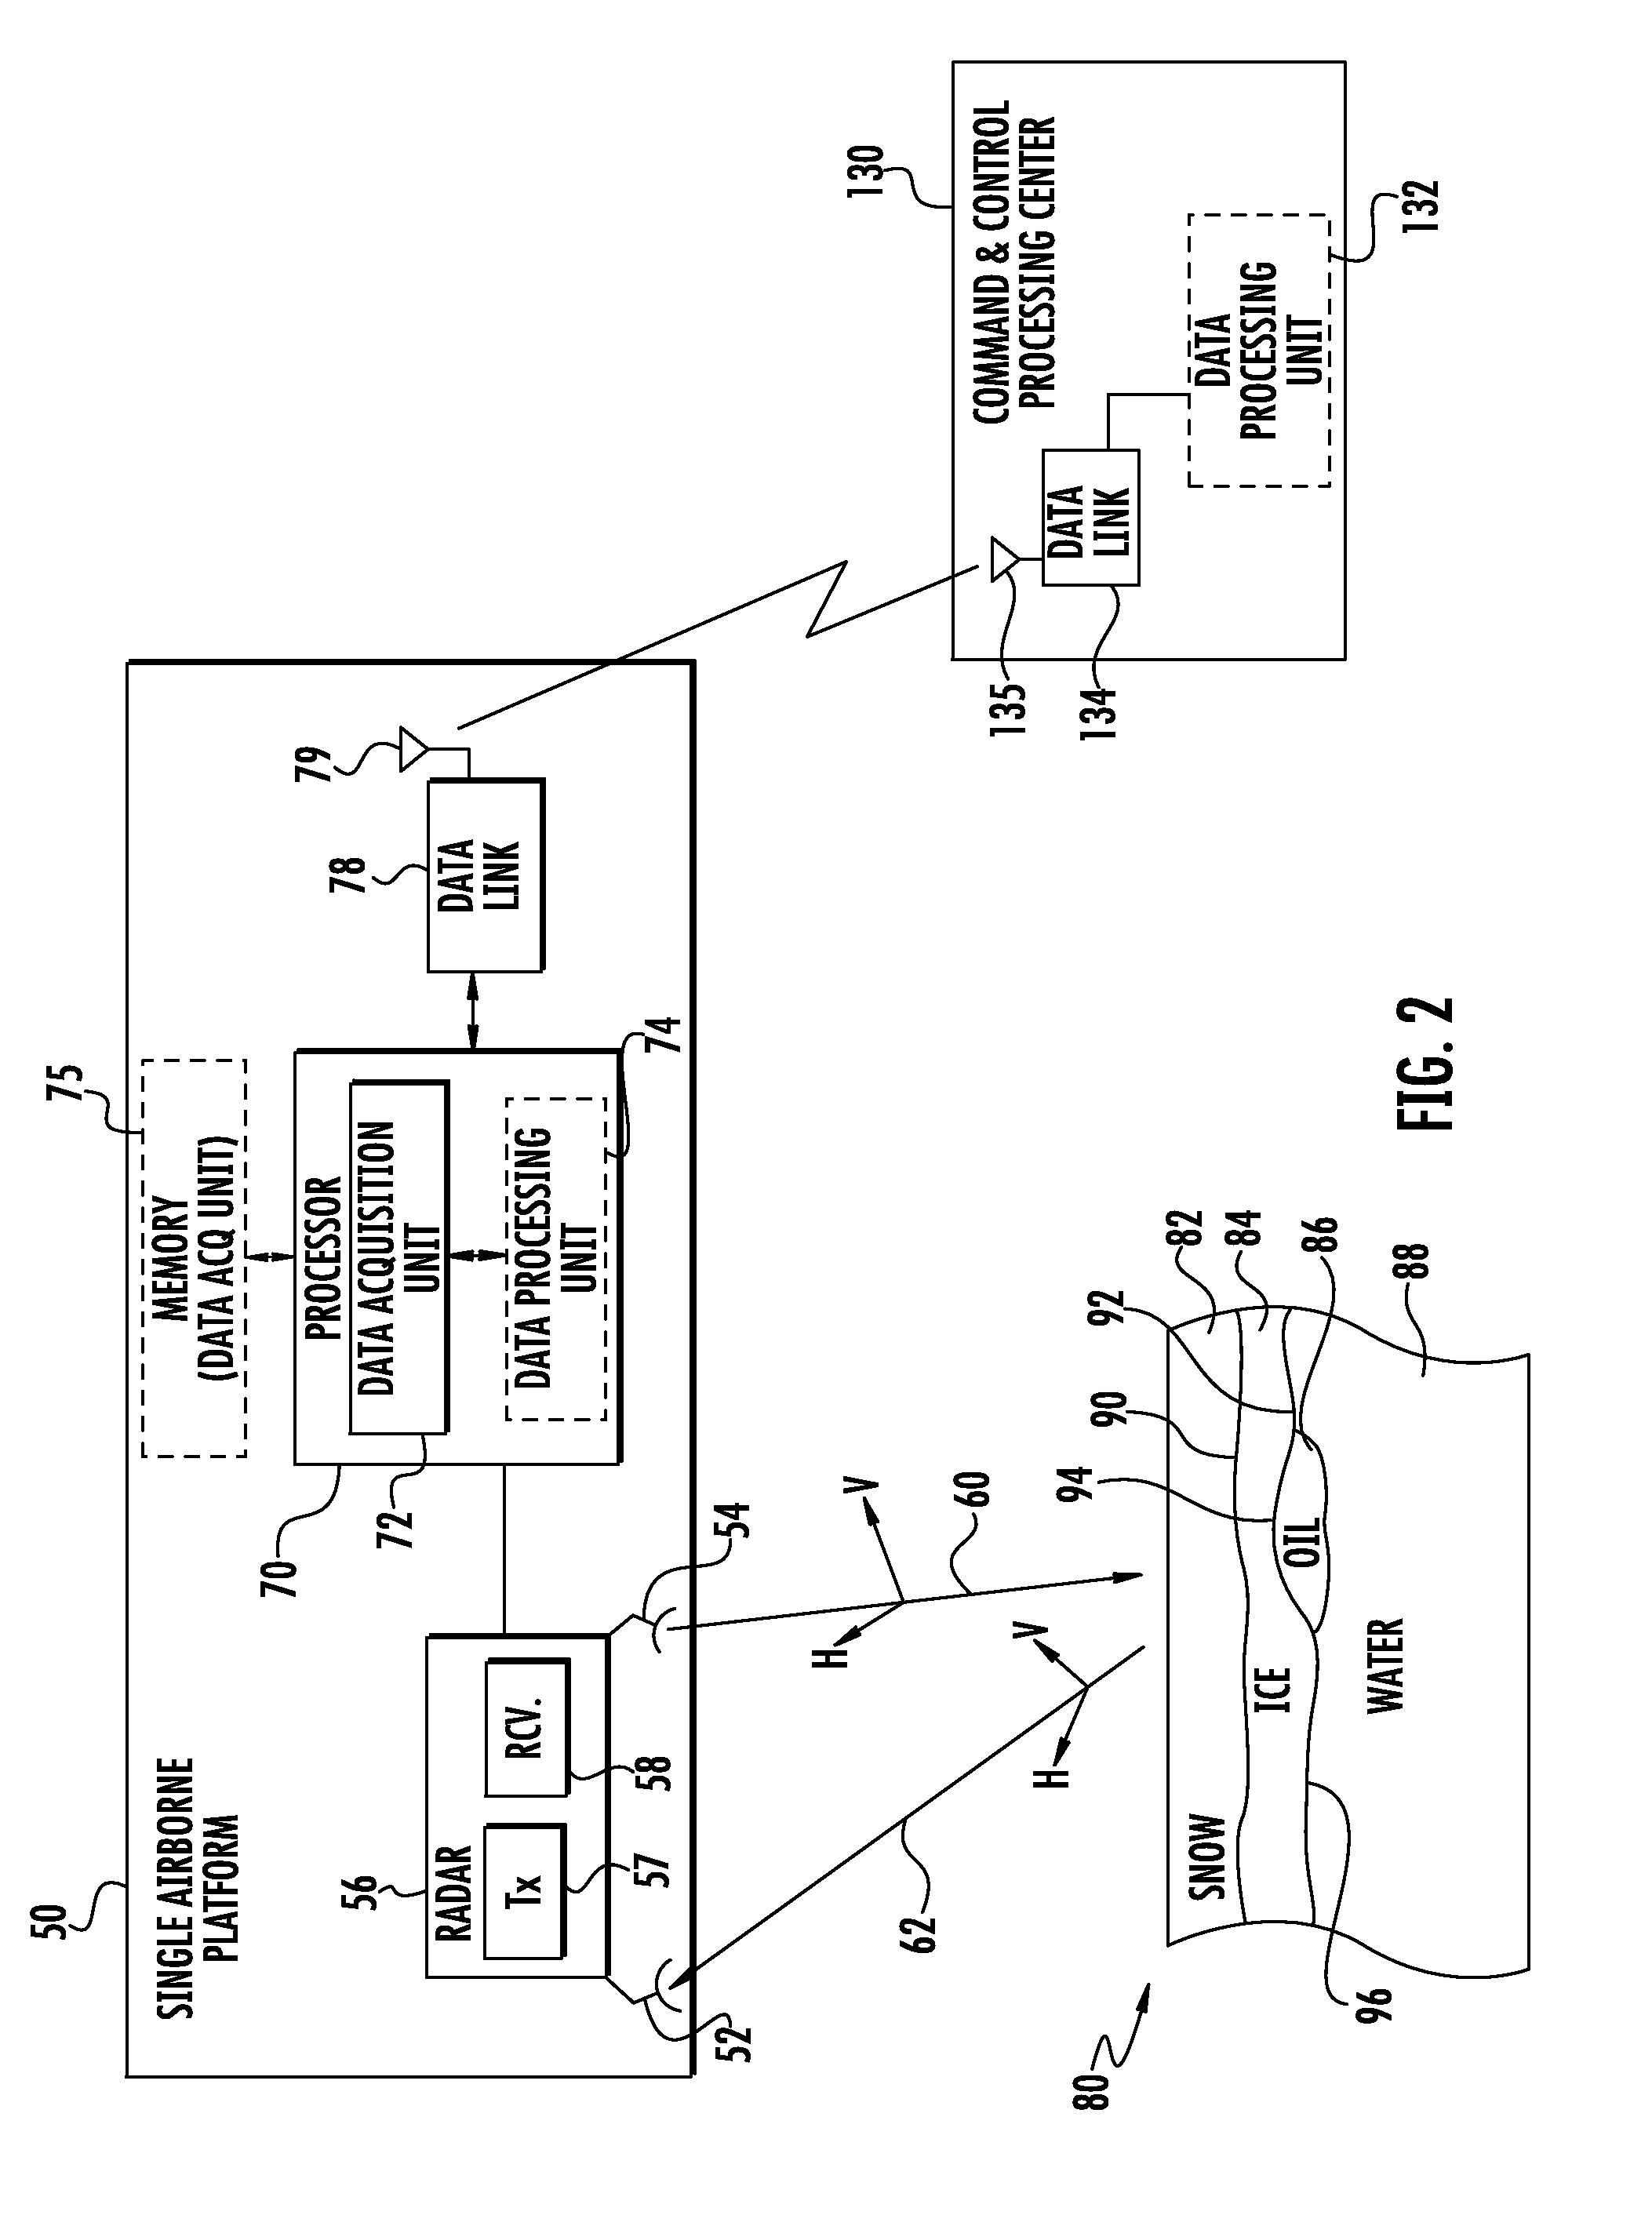 Method and system using radiometric volumetric data for detecting oil covered by ice